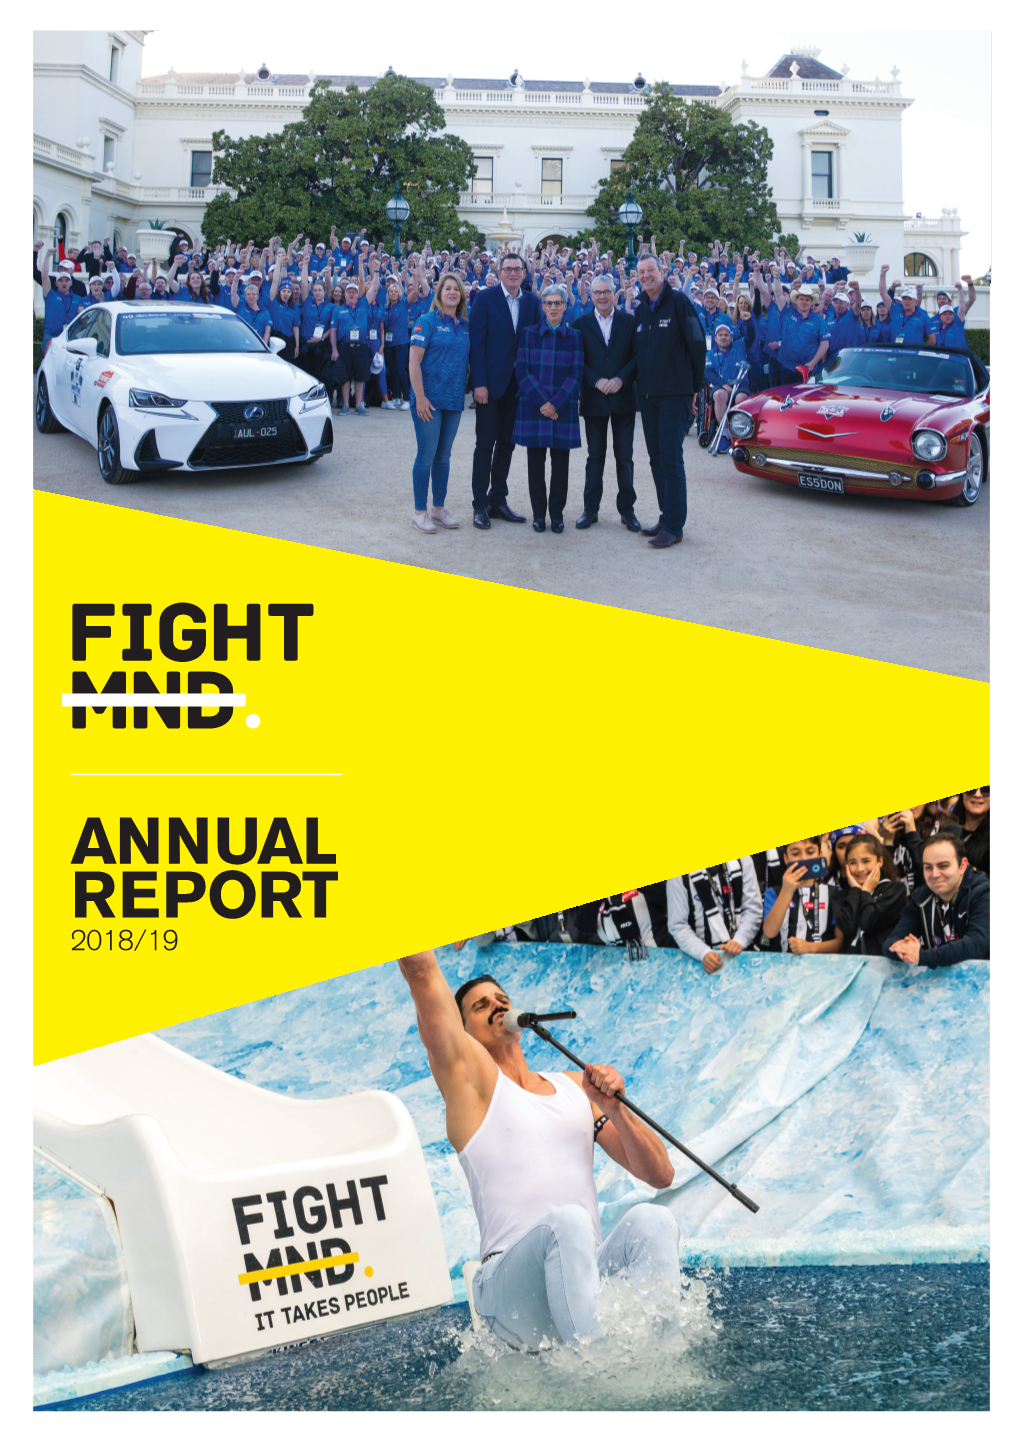 Annual Report 2018/19 Contents